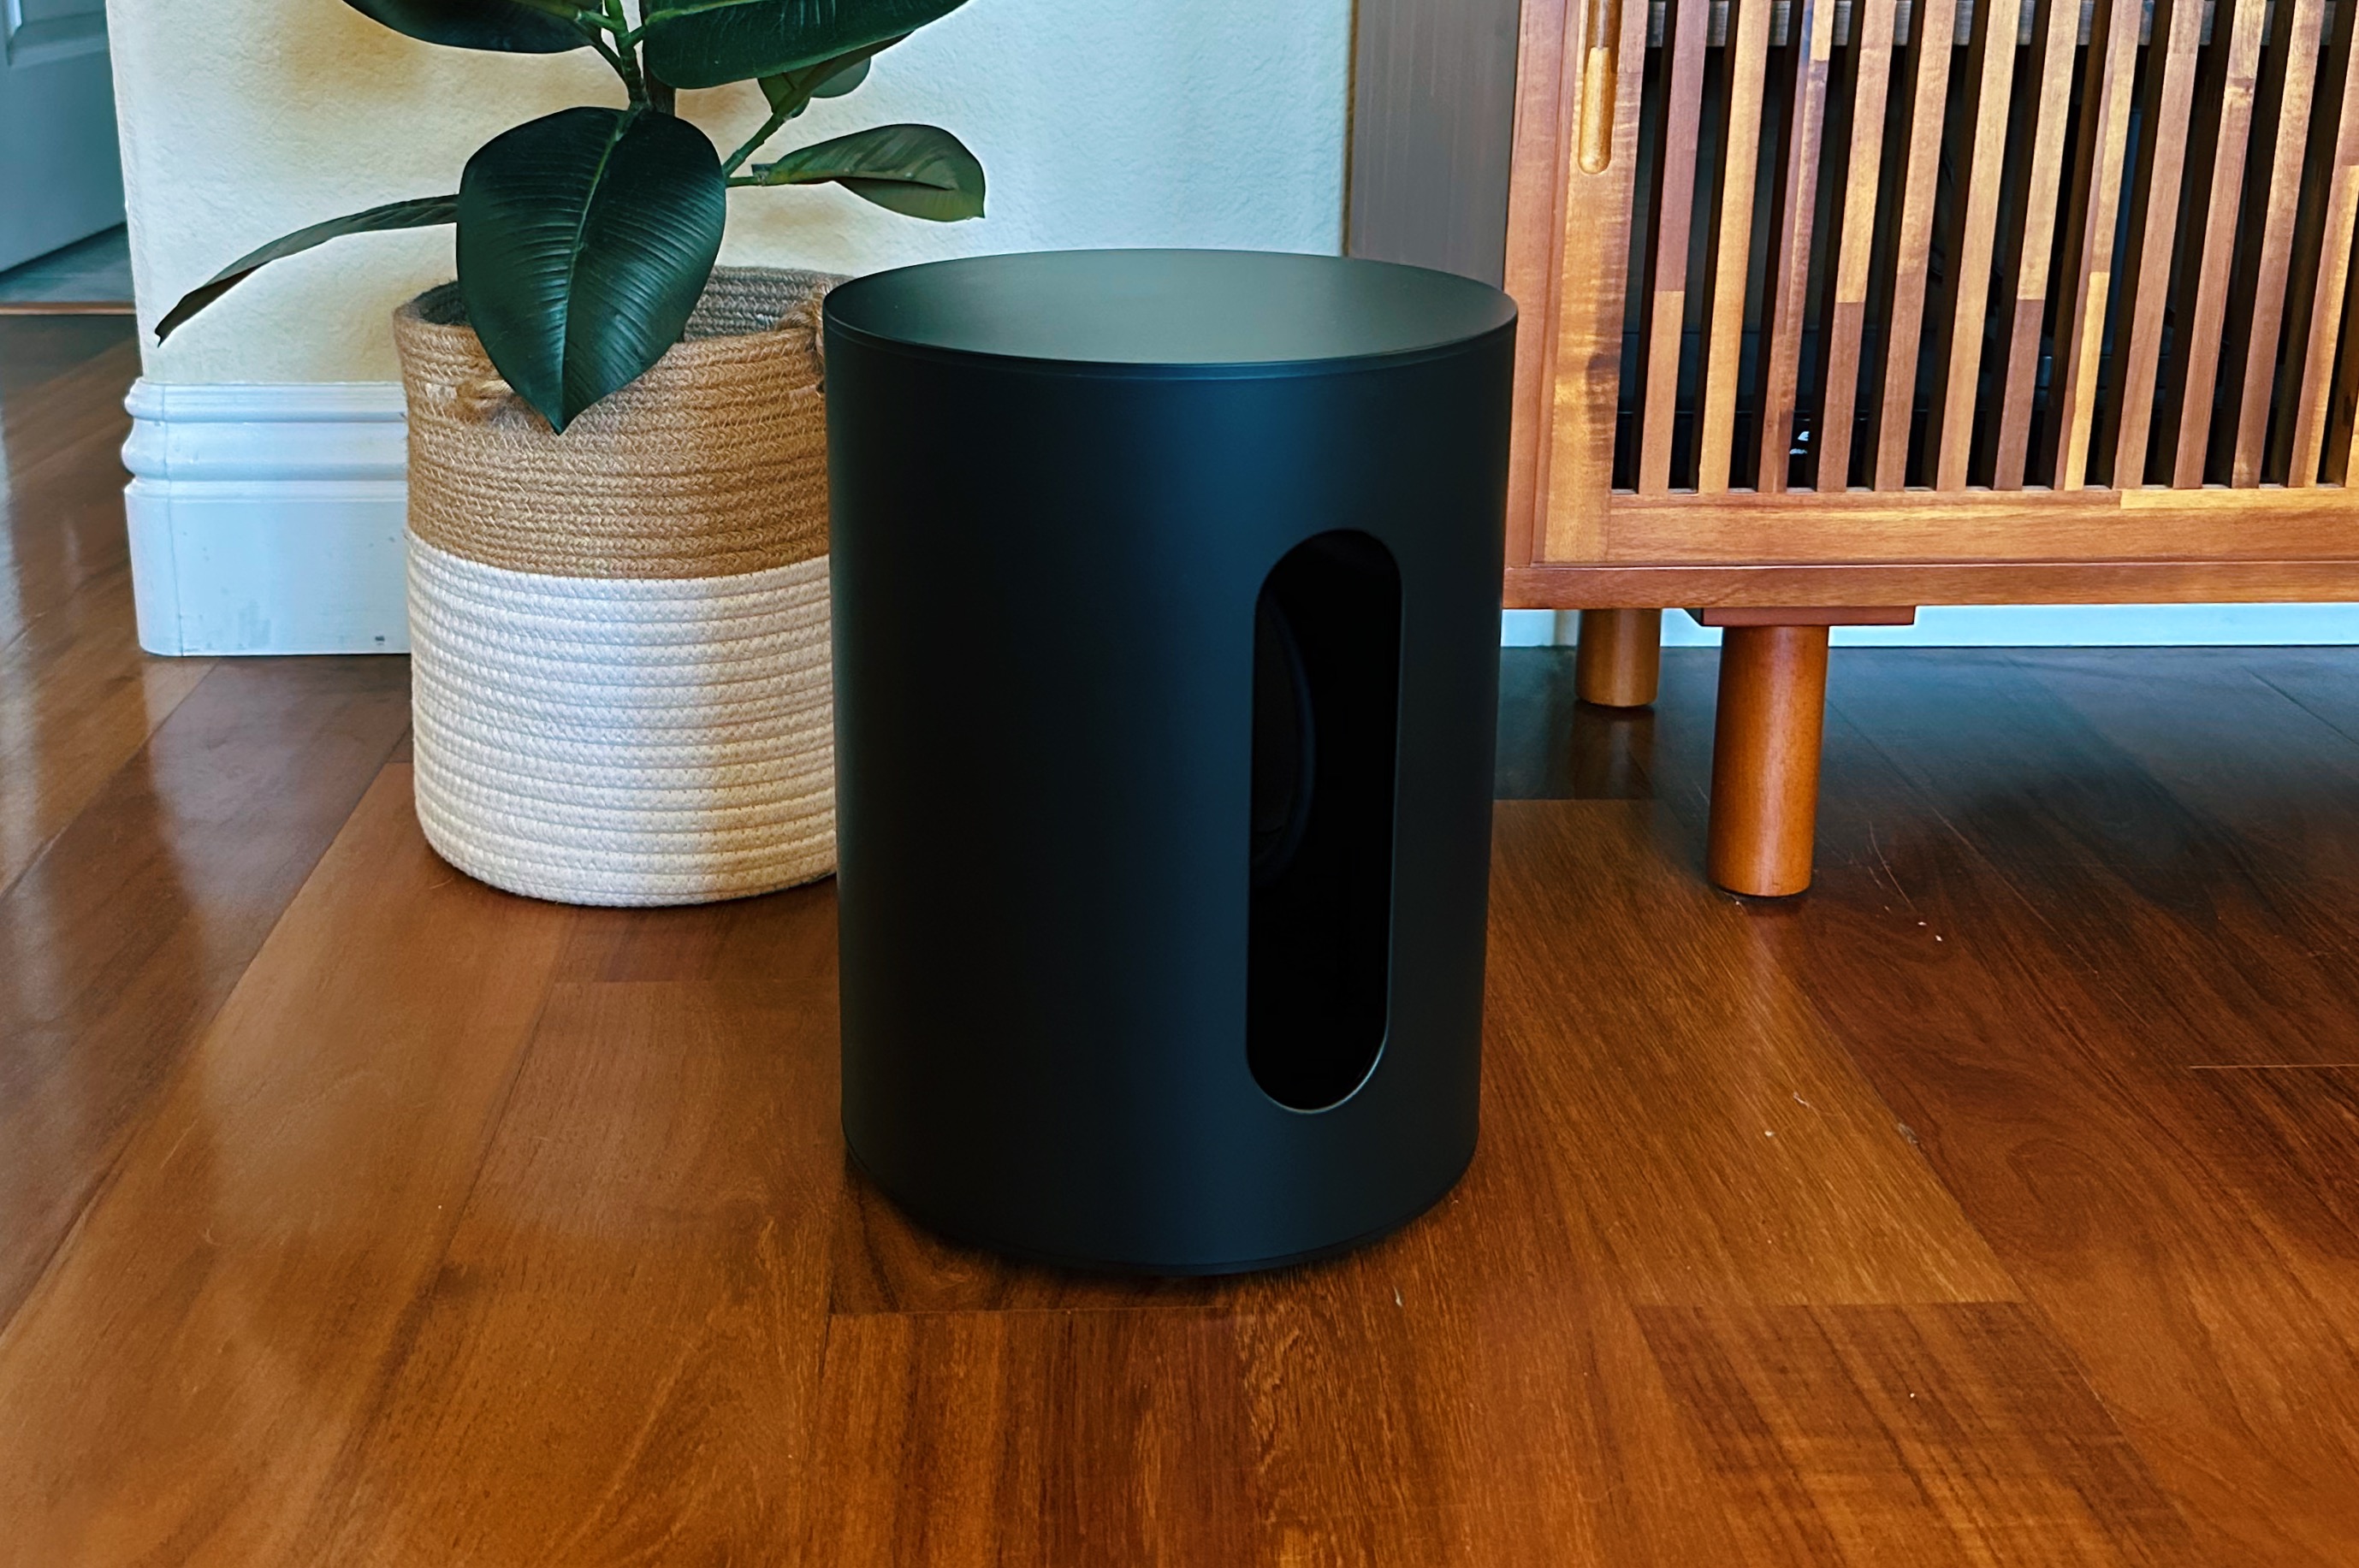 Sonos Sub Mini Review: A Cheaper Subwoofer for Its Other Wireless